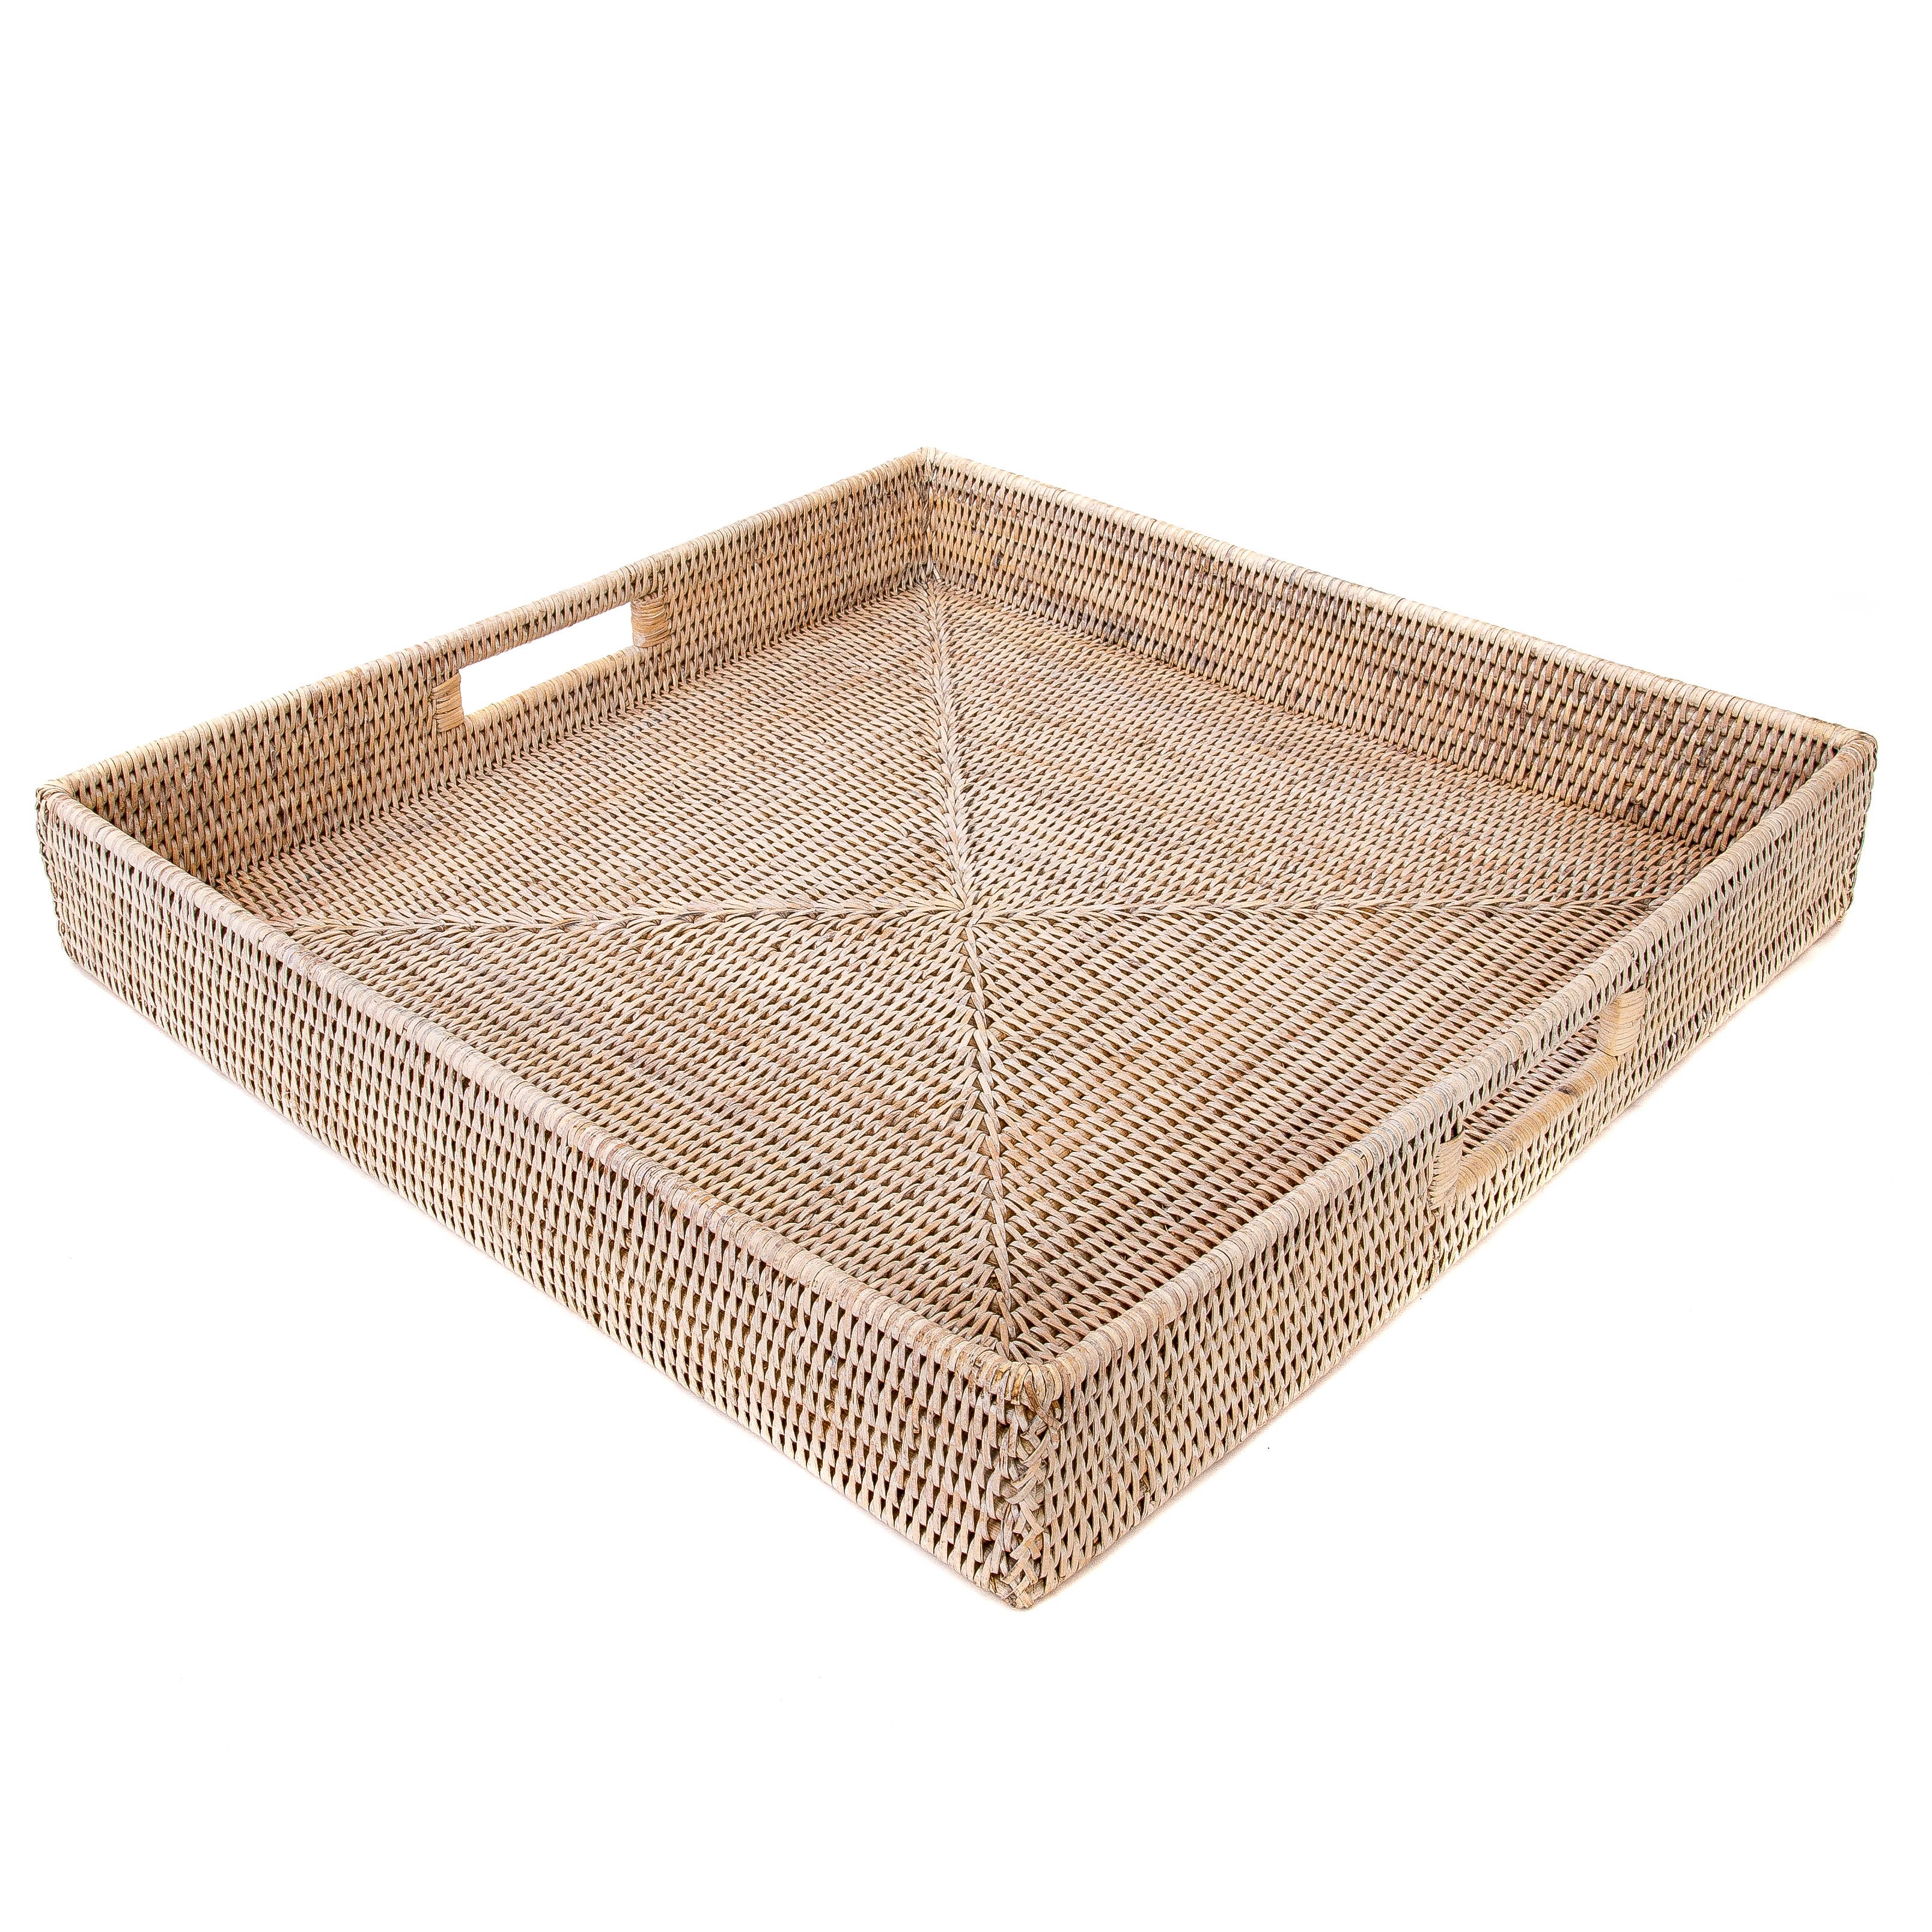 Artifacts Trading Company - Artifacts Rattan Square Serving/Ottoman Tray: 18" / Honey Brown